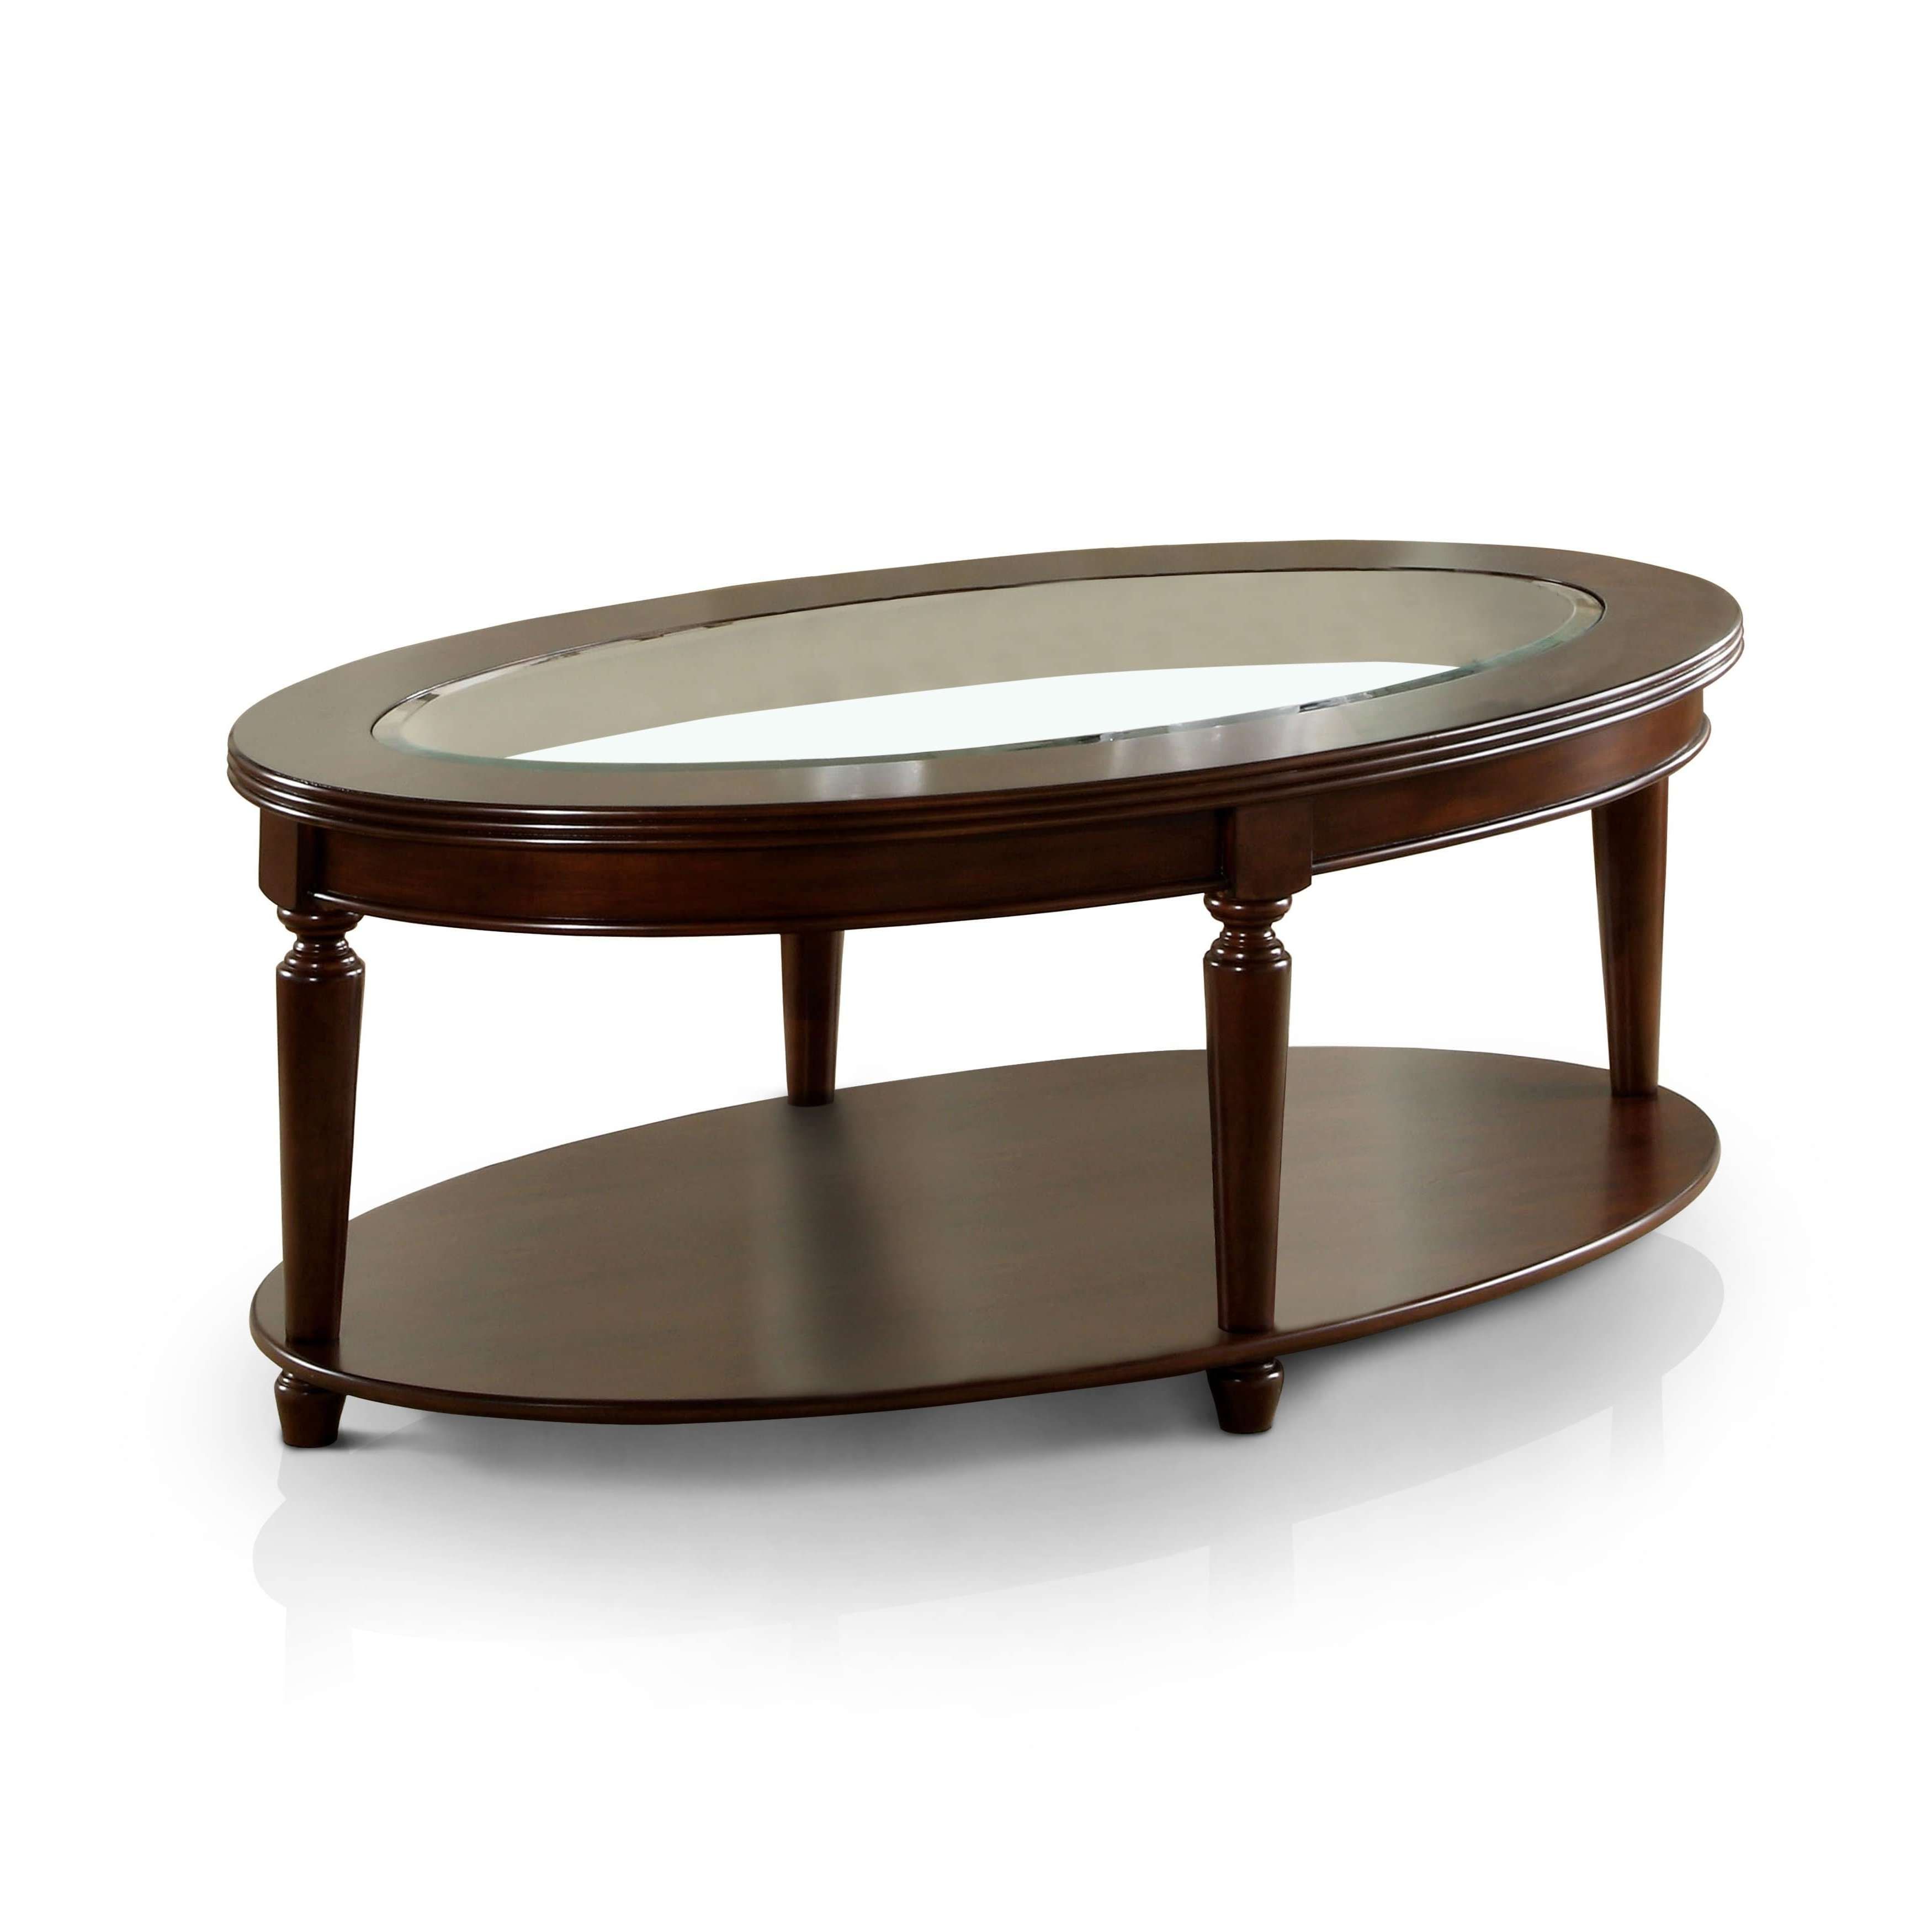 Furniture Of America Crescent Dark Cherry Glass Top Oval Coffee Inside 2018 Dark Coffee Tables (Gallery 19 of 20)